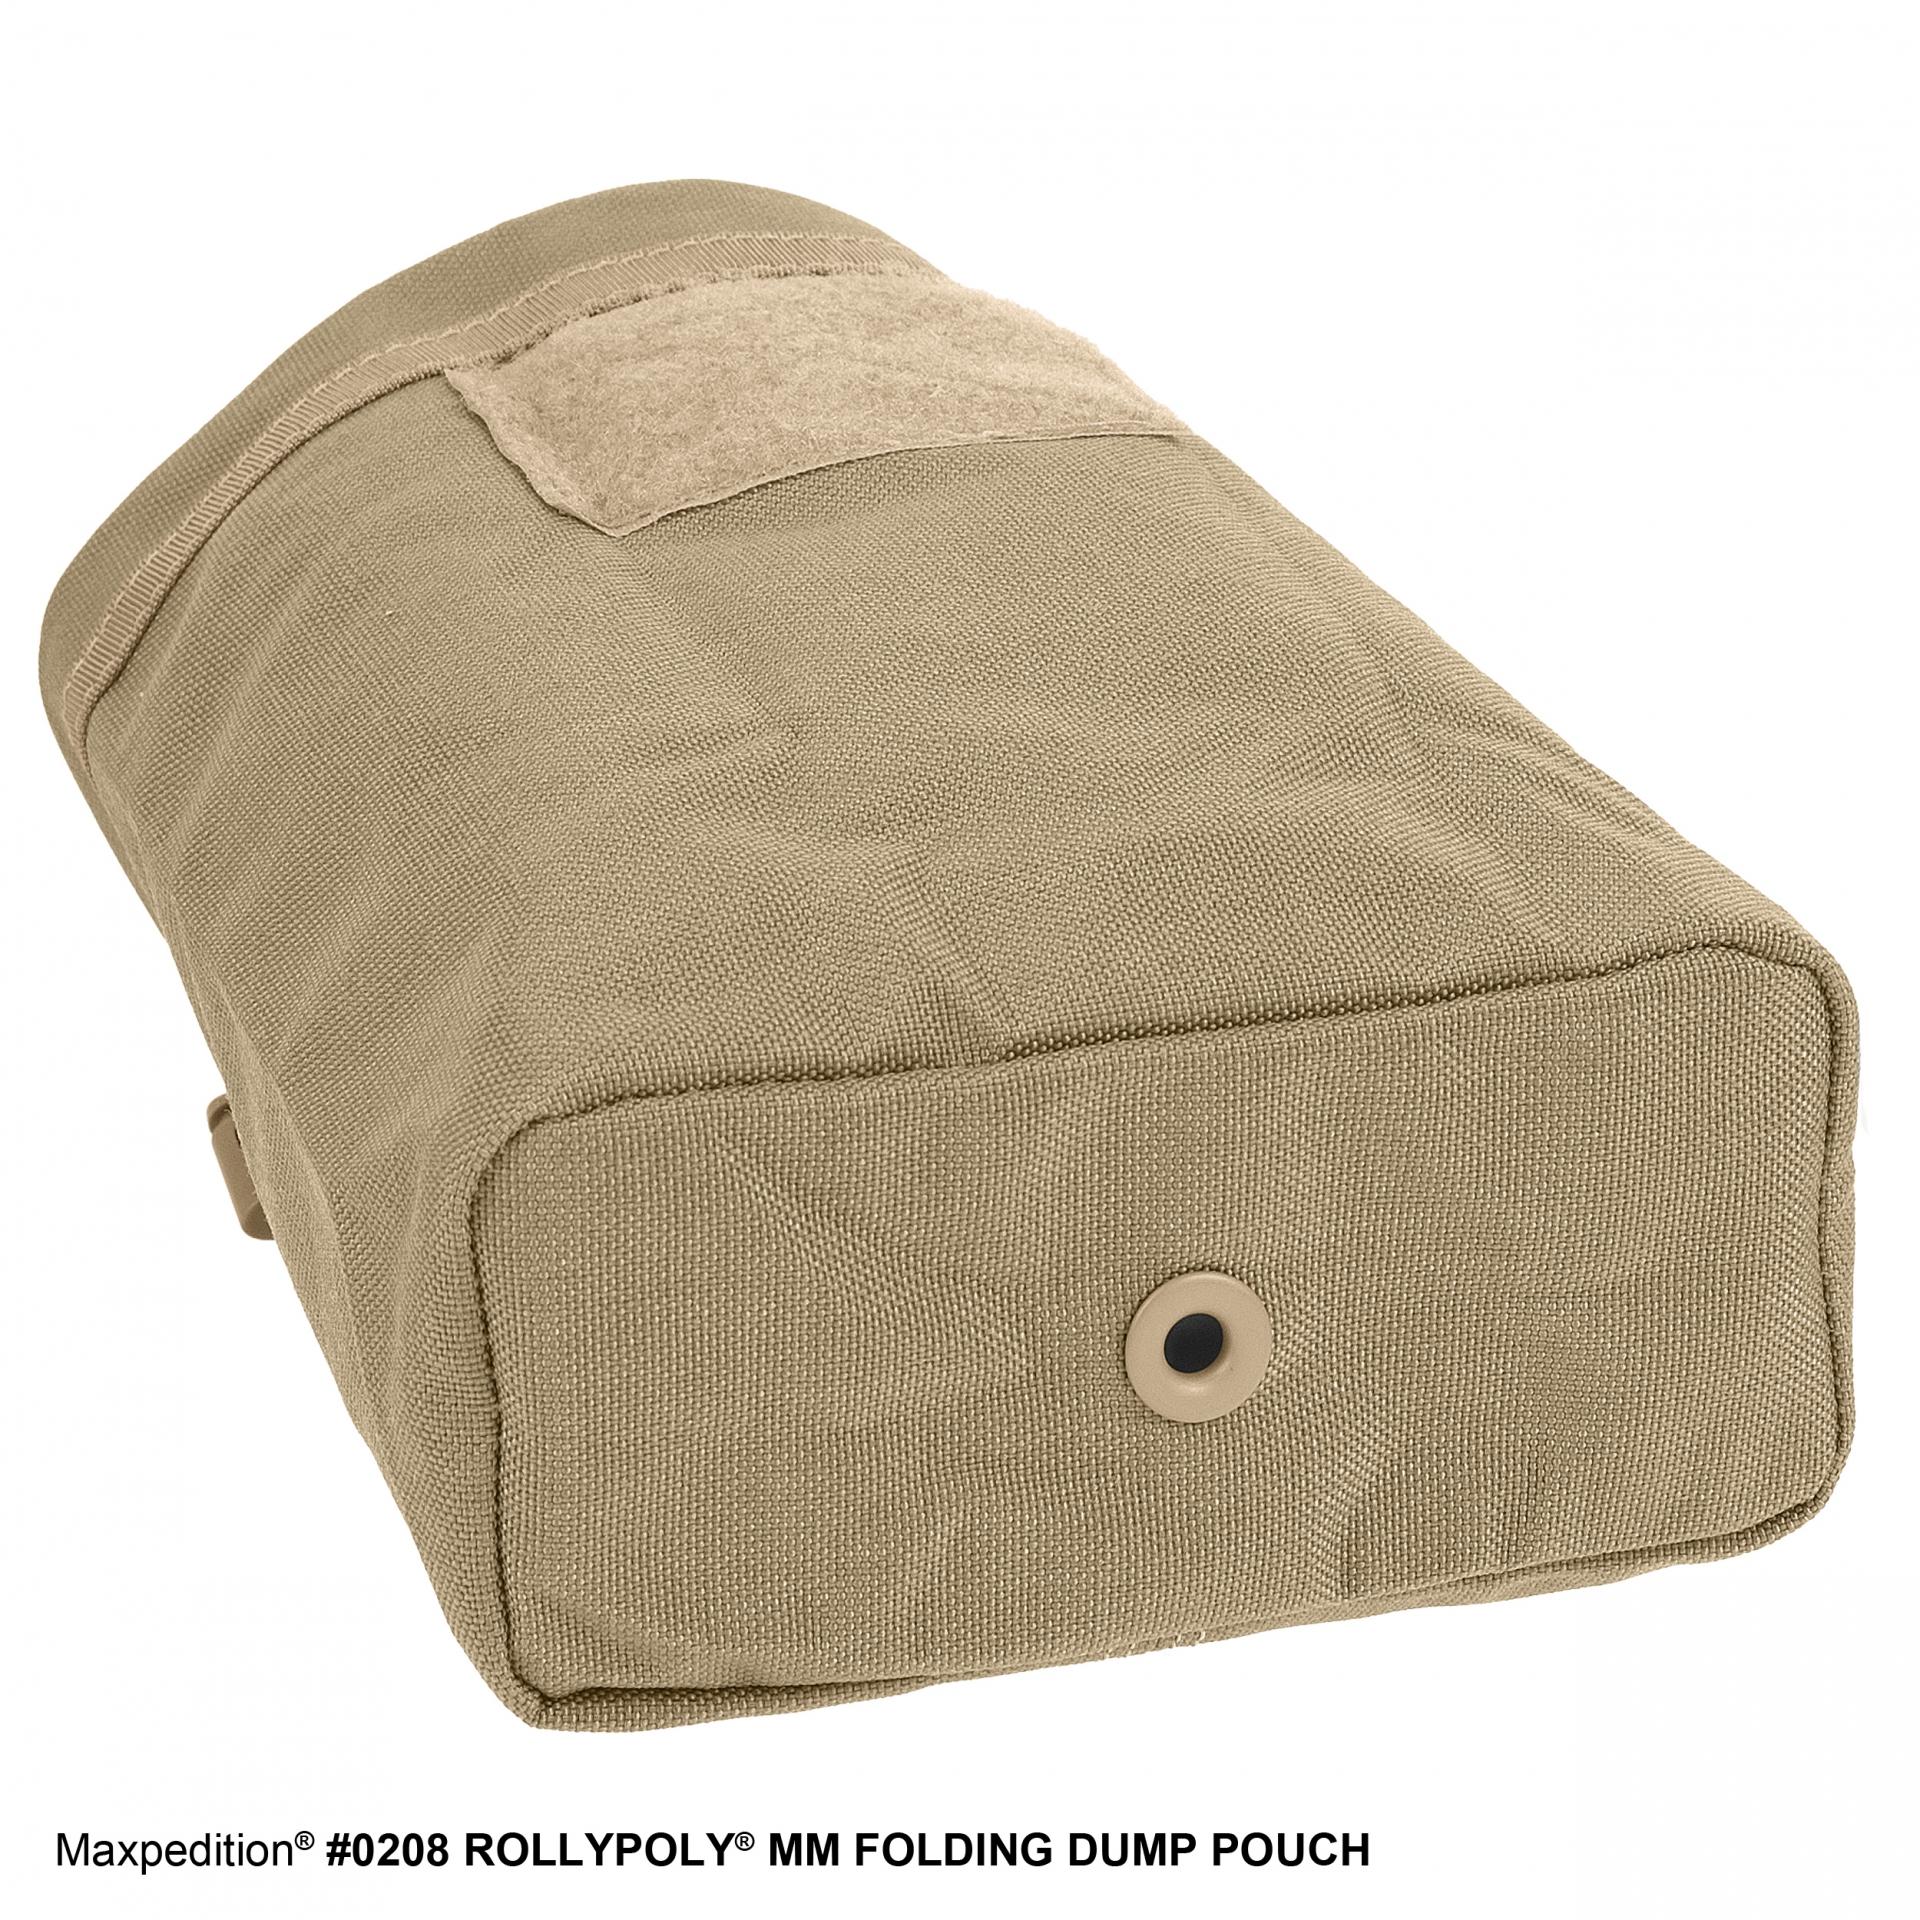 Maxpedition ROLLYPOLY MM FOLDING DUMP POUCH 0208